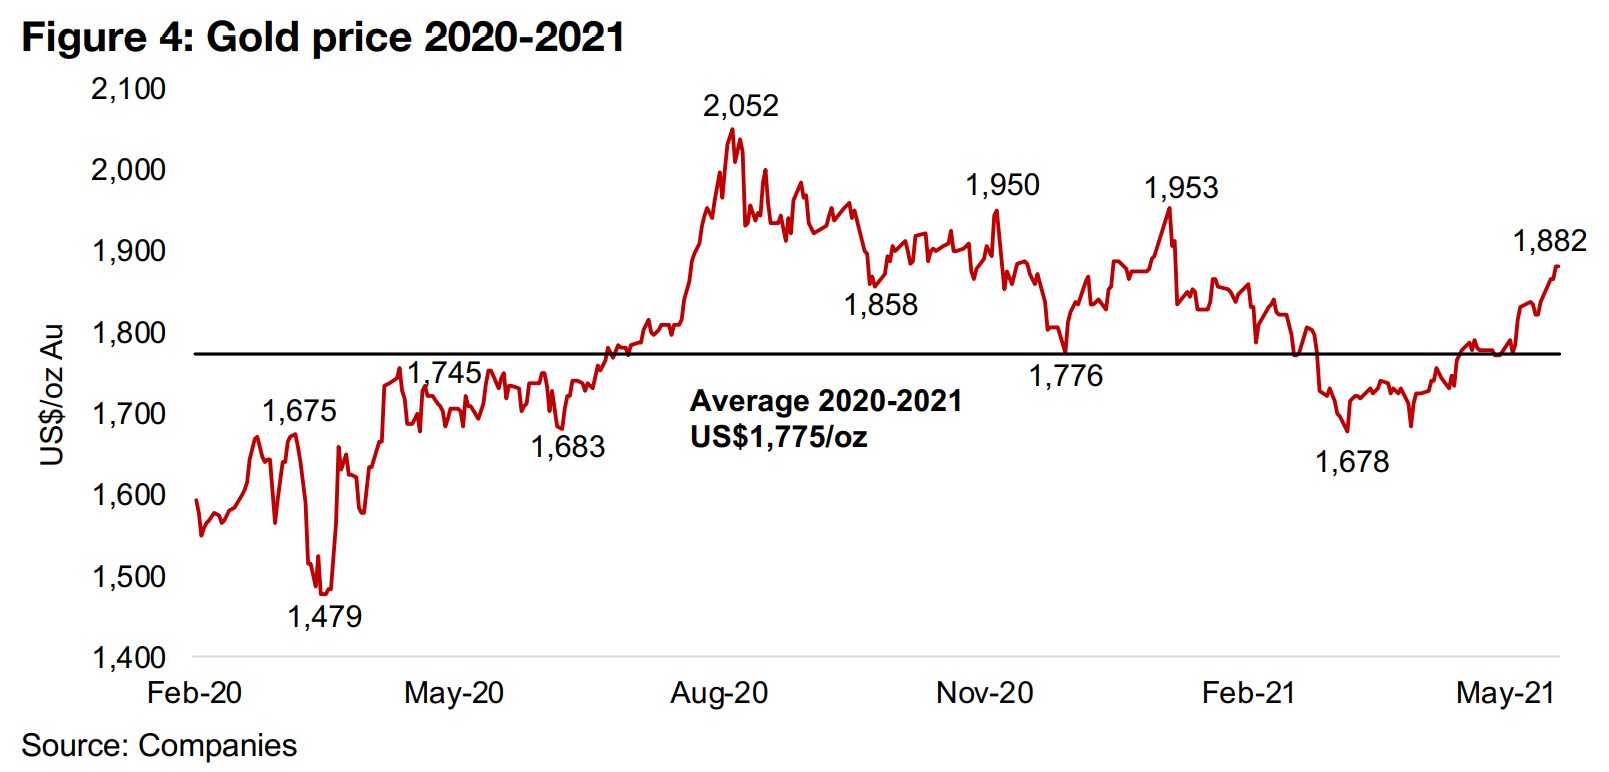 1) Gold back above the 2020-2021 average